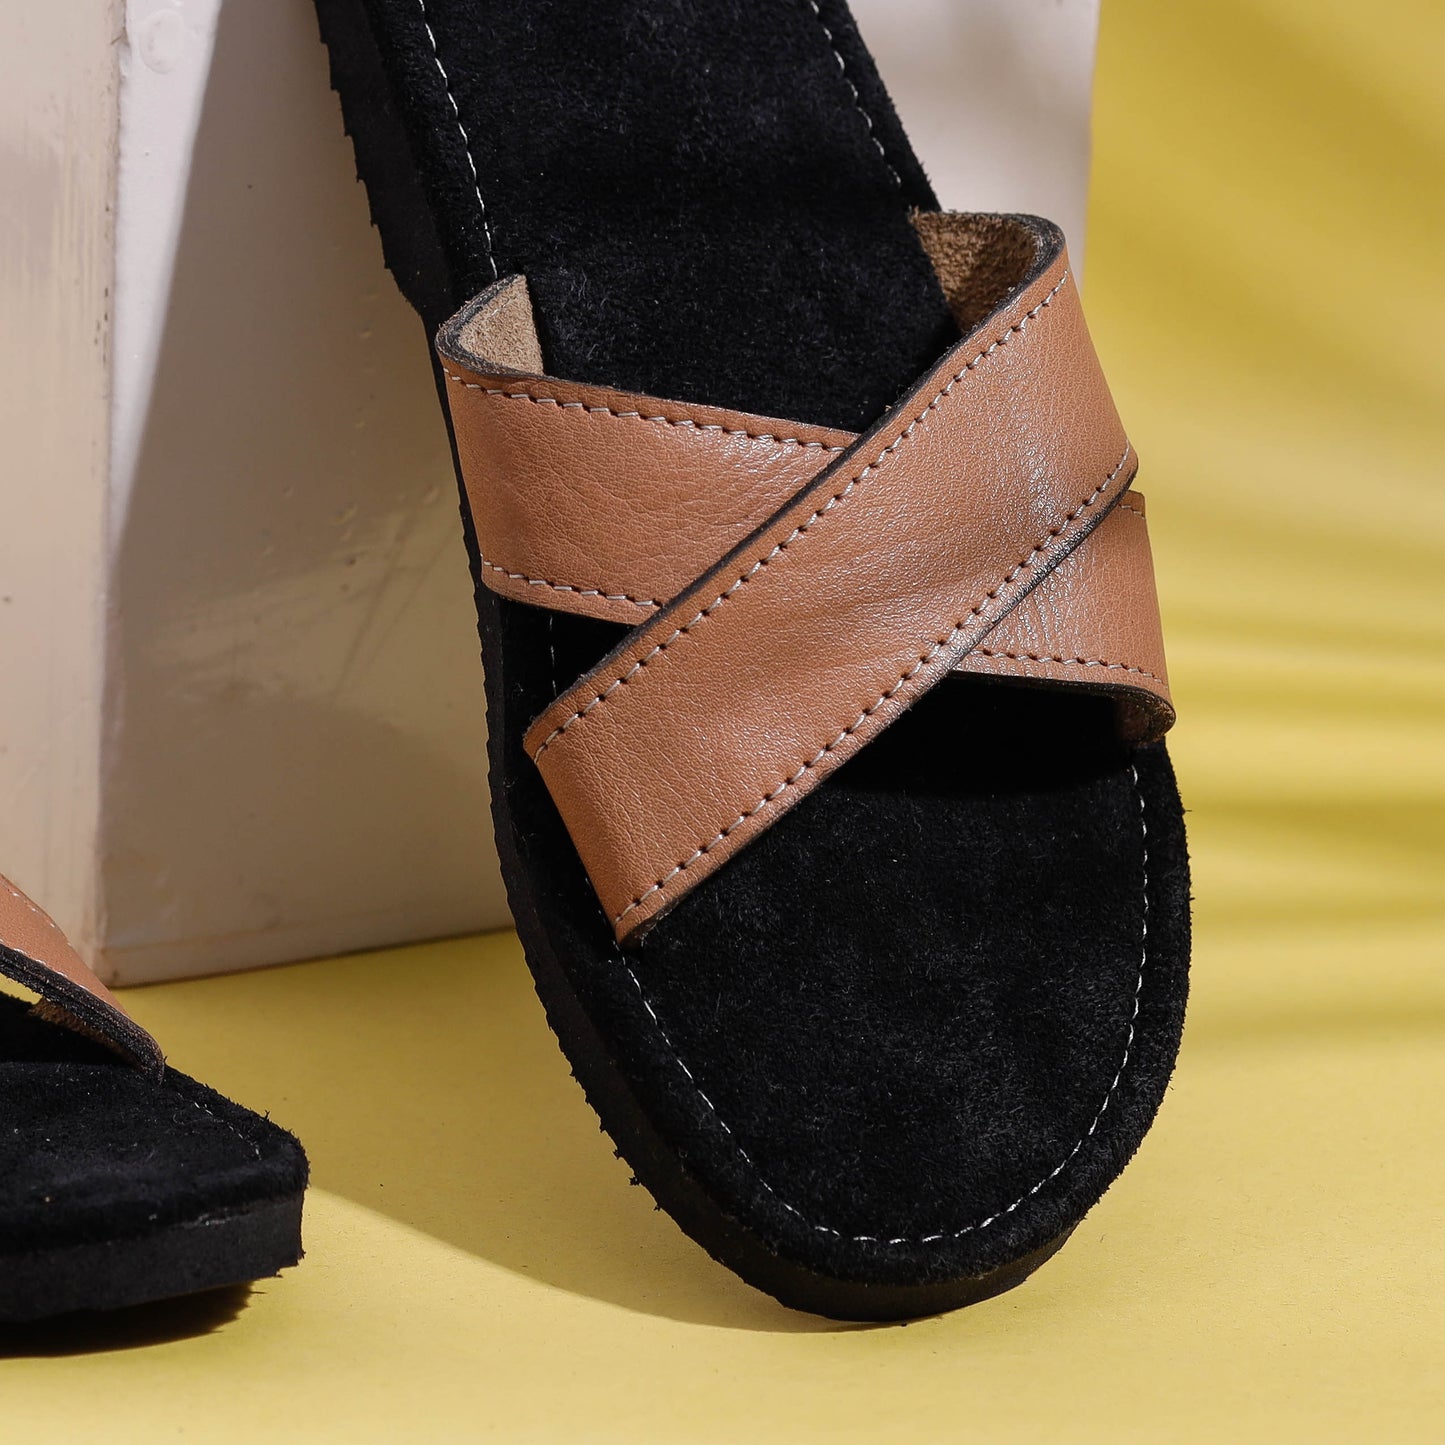 Black & Tan Handcrafted Women's Leather Slippers with Suede